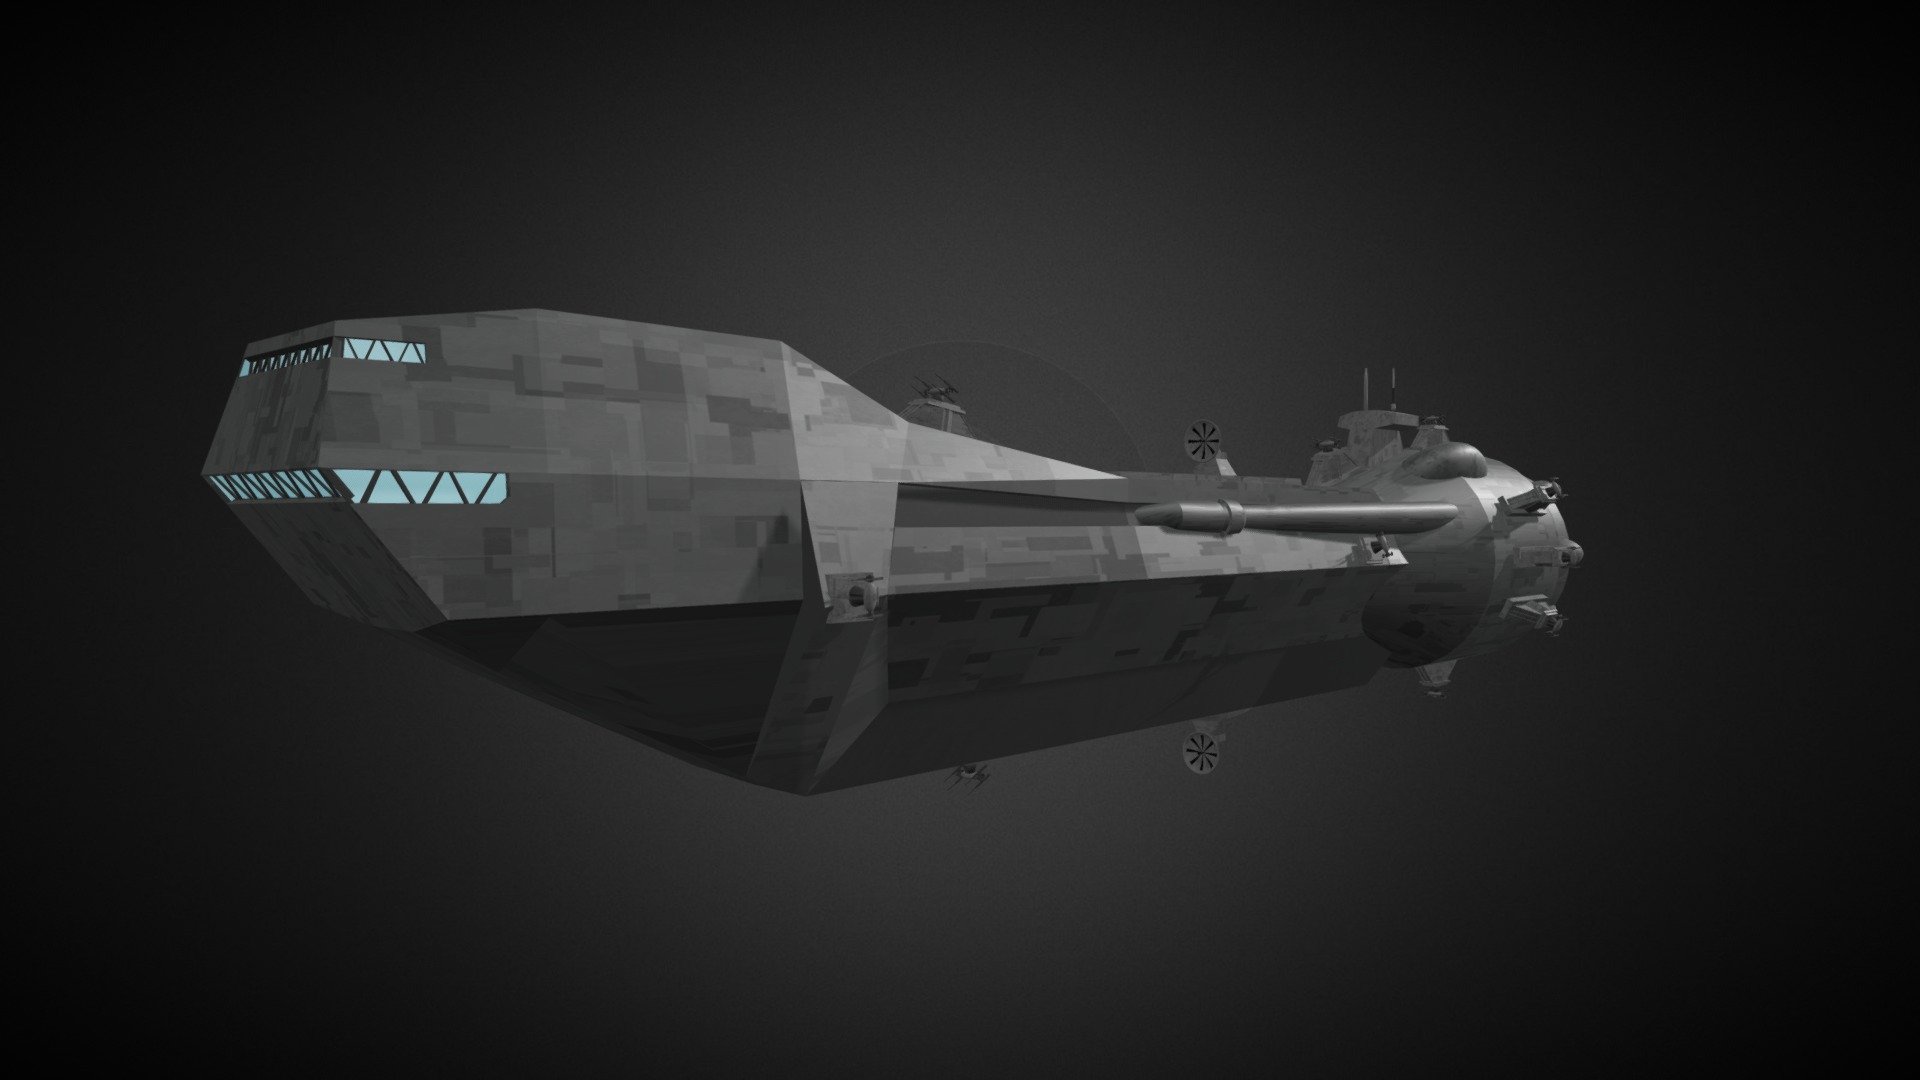 The Lancer Frigate is a 250 meter long capital ship that the Empire designed specifically to combat Rebel starfighters. The Lancer has twenty AG-2G quad laser cannons specifically calibrated for use against high speed manueverable starfighters.  The weapons have superior tracking and targeting capabilities and are mounted on elevated towers to provide an increased field of fire 3d model